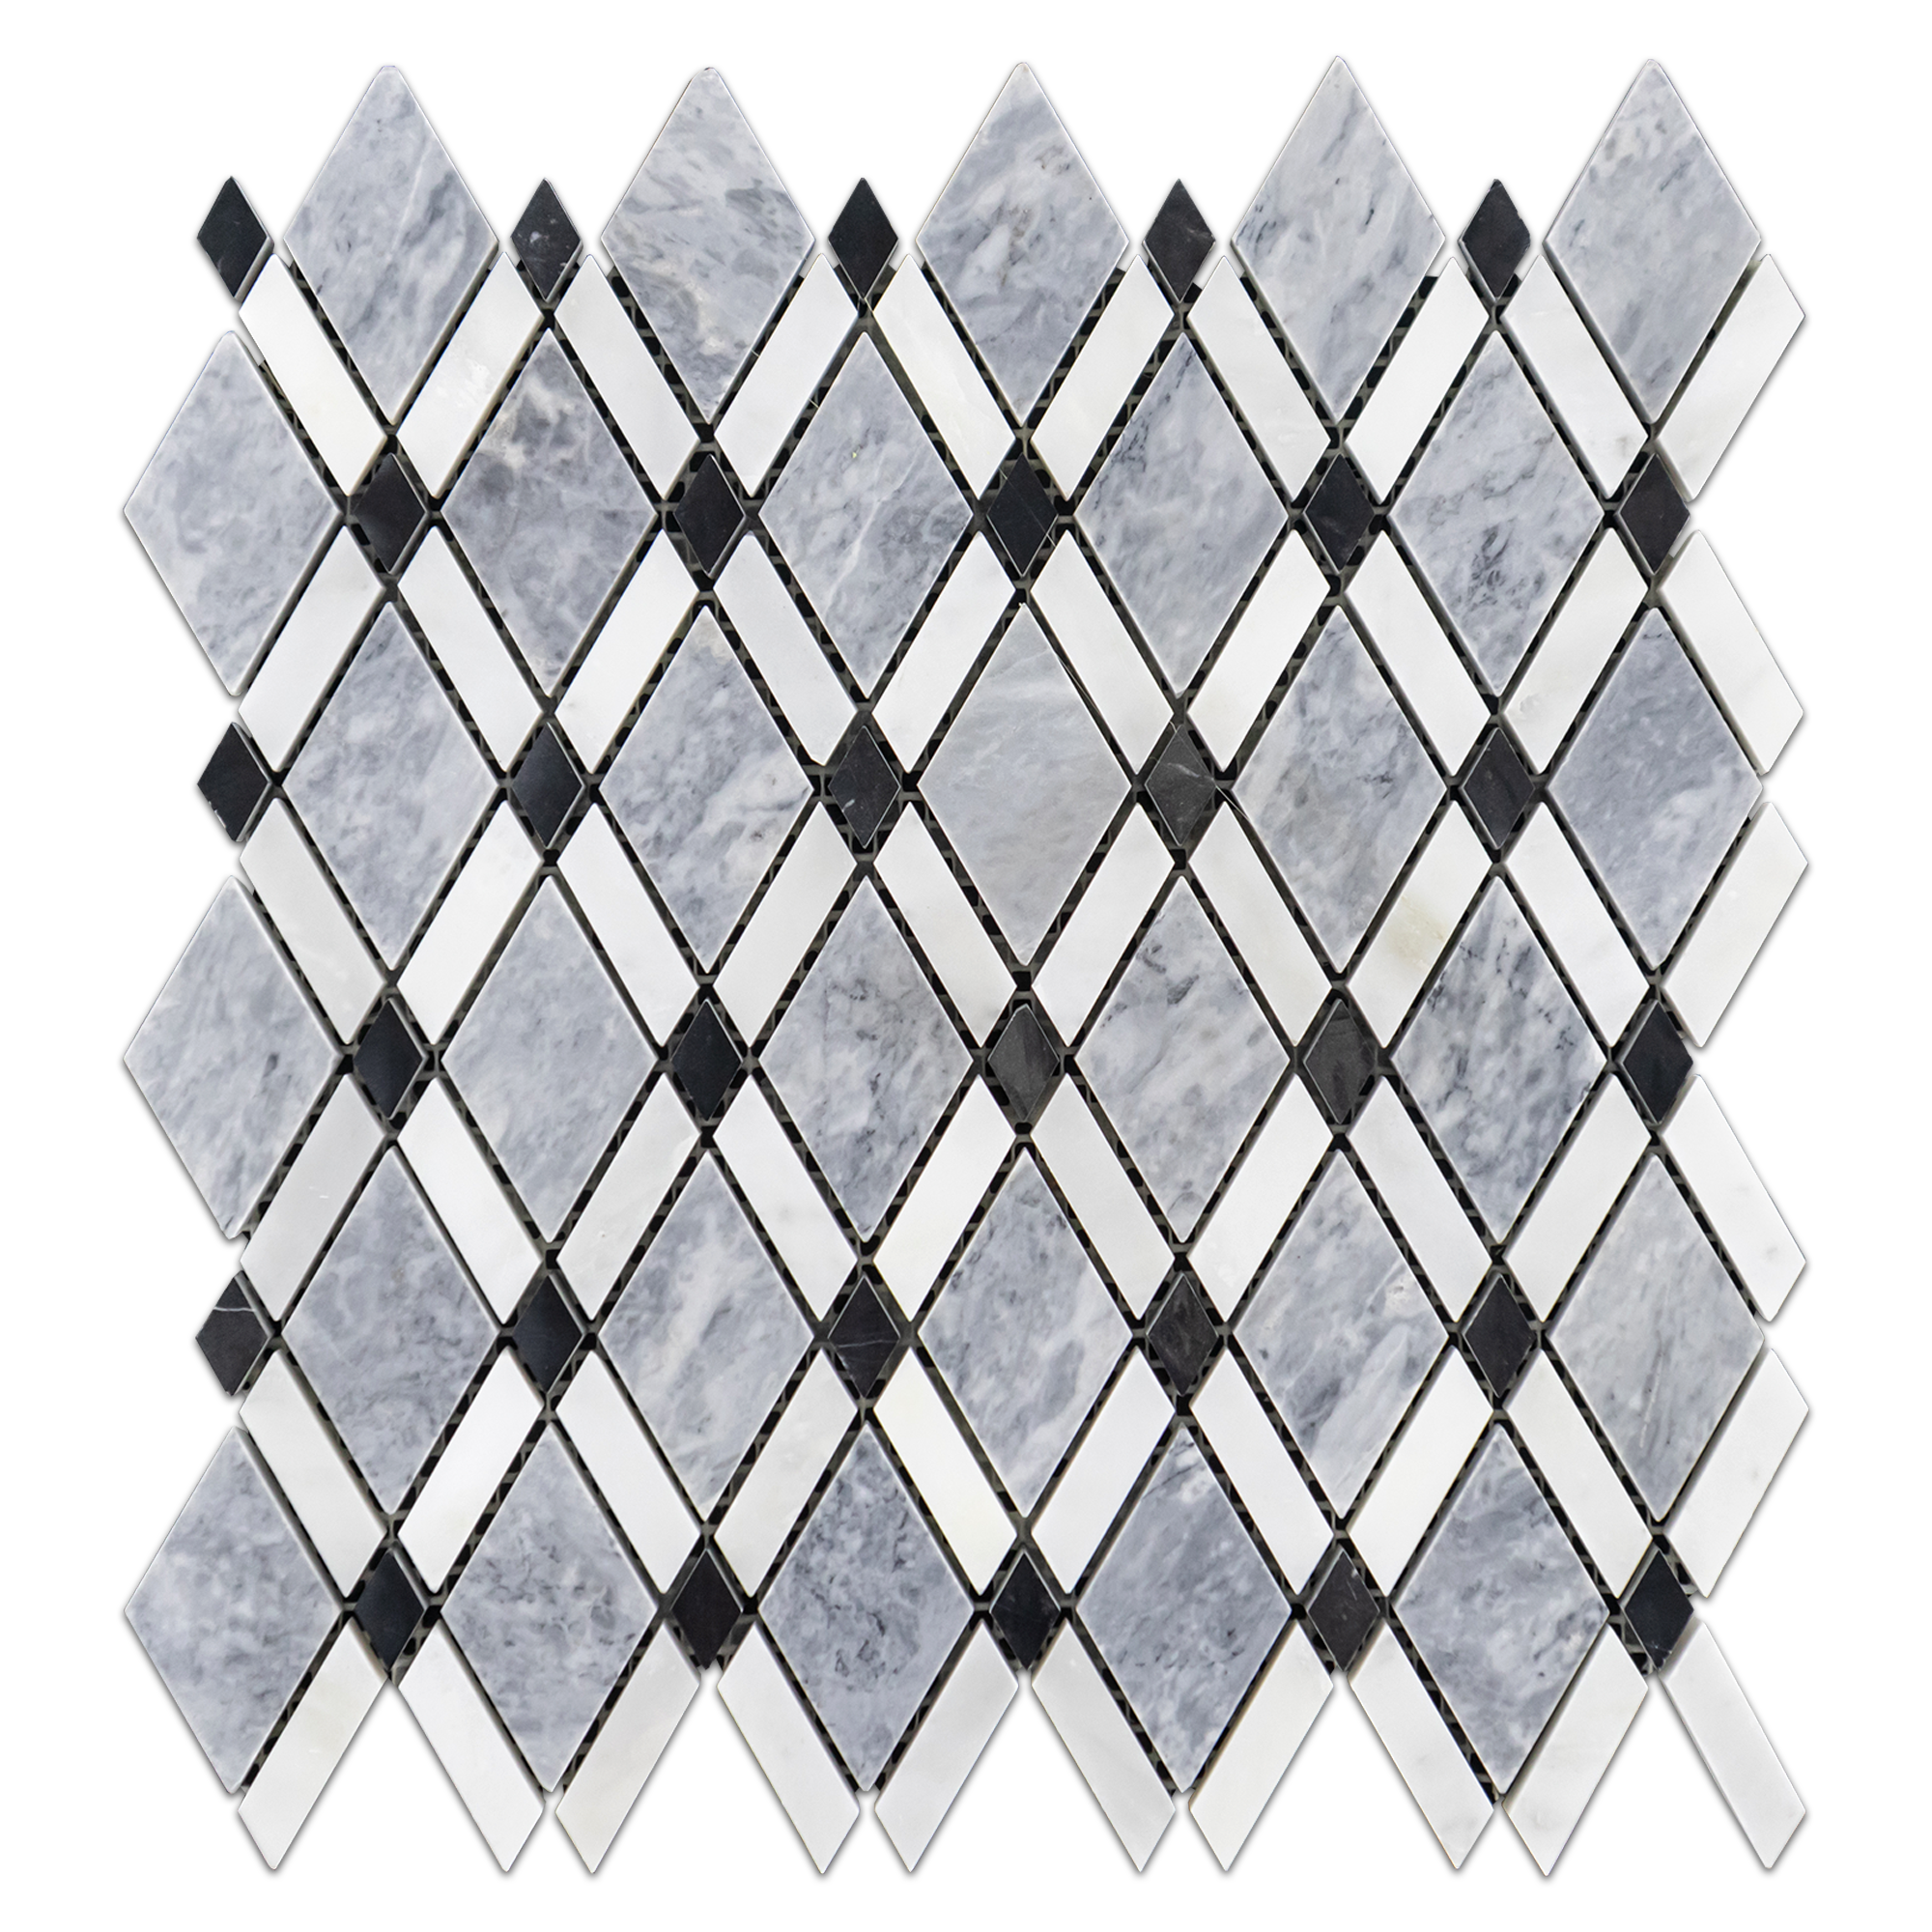 Elon Pacific Gray, Absolute White, and Black Marble Outlined Rhomboid Field Mosaic Tile 10.4375x10.75x0.375 Polished - Surface Group International Product